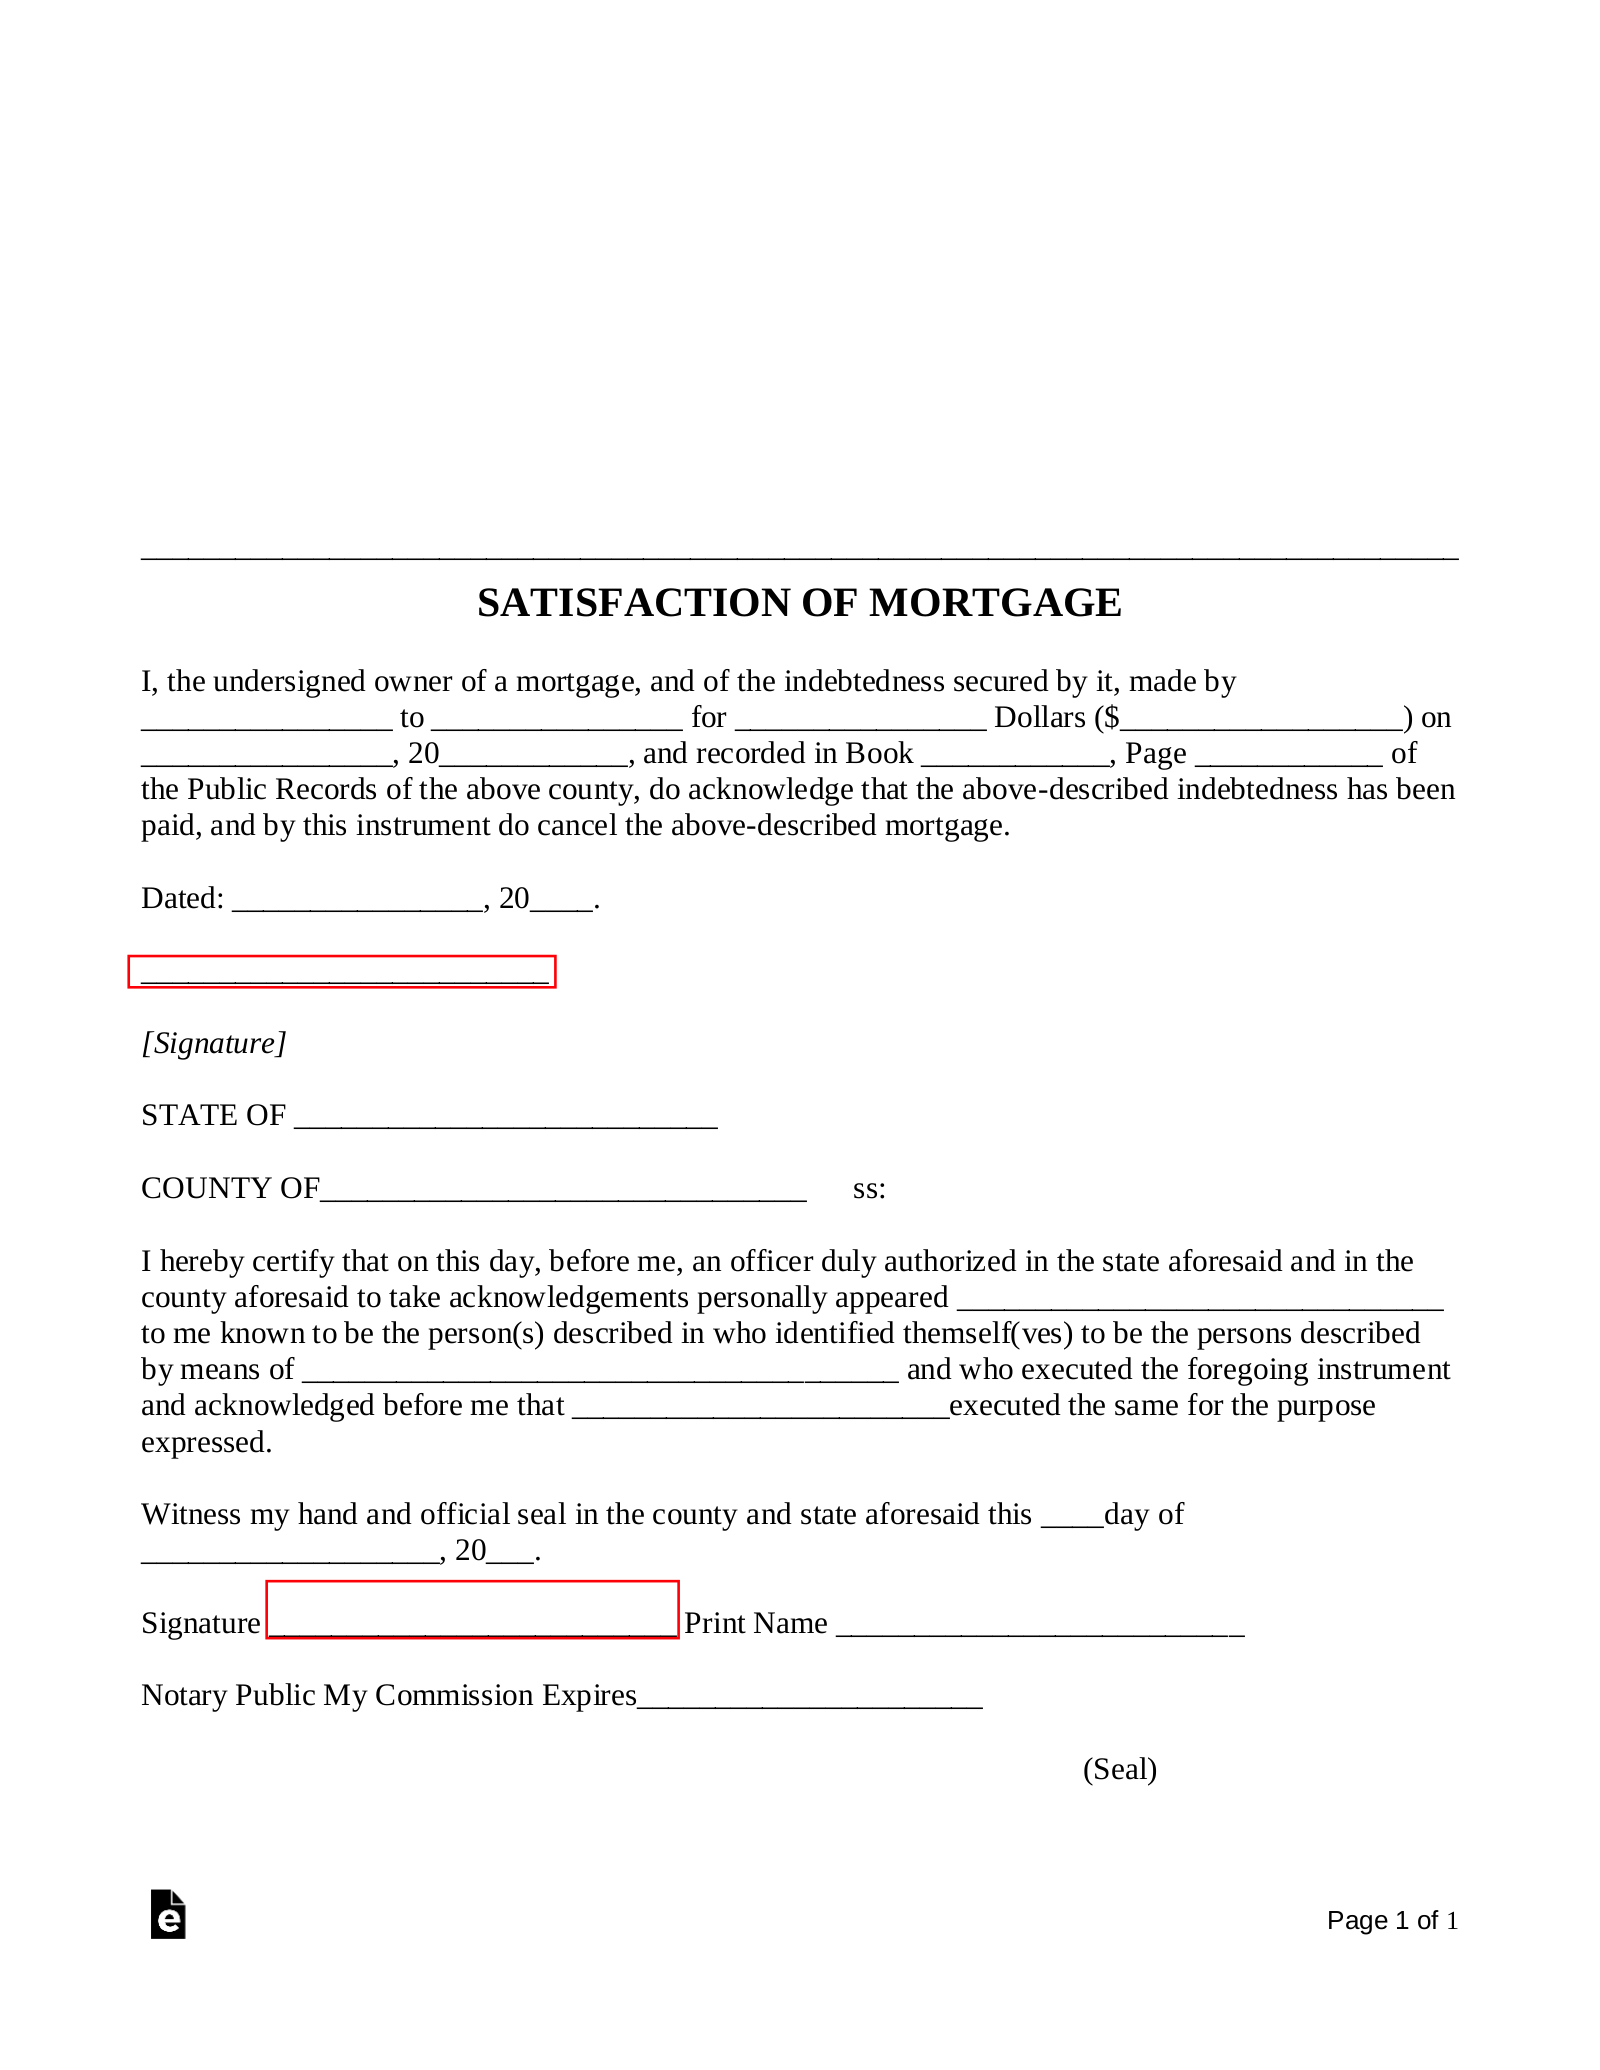 Mortgage Payoff Letter Template from eforms.com